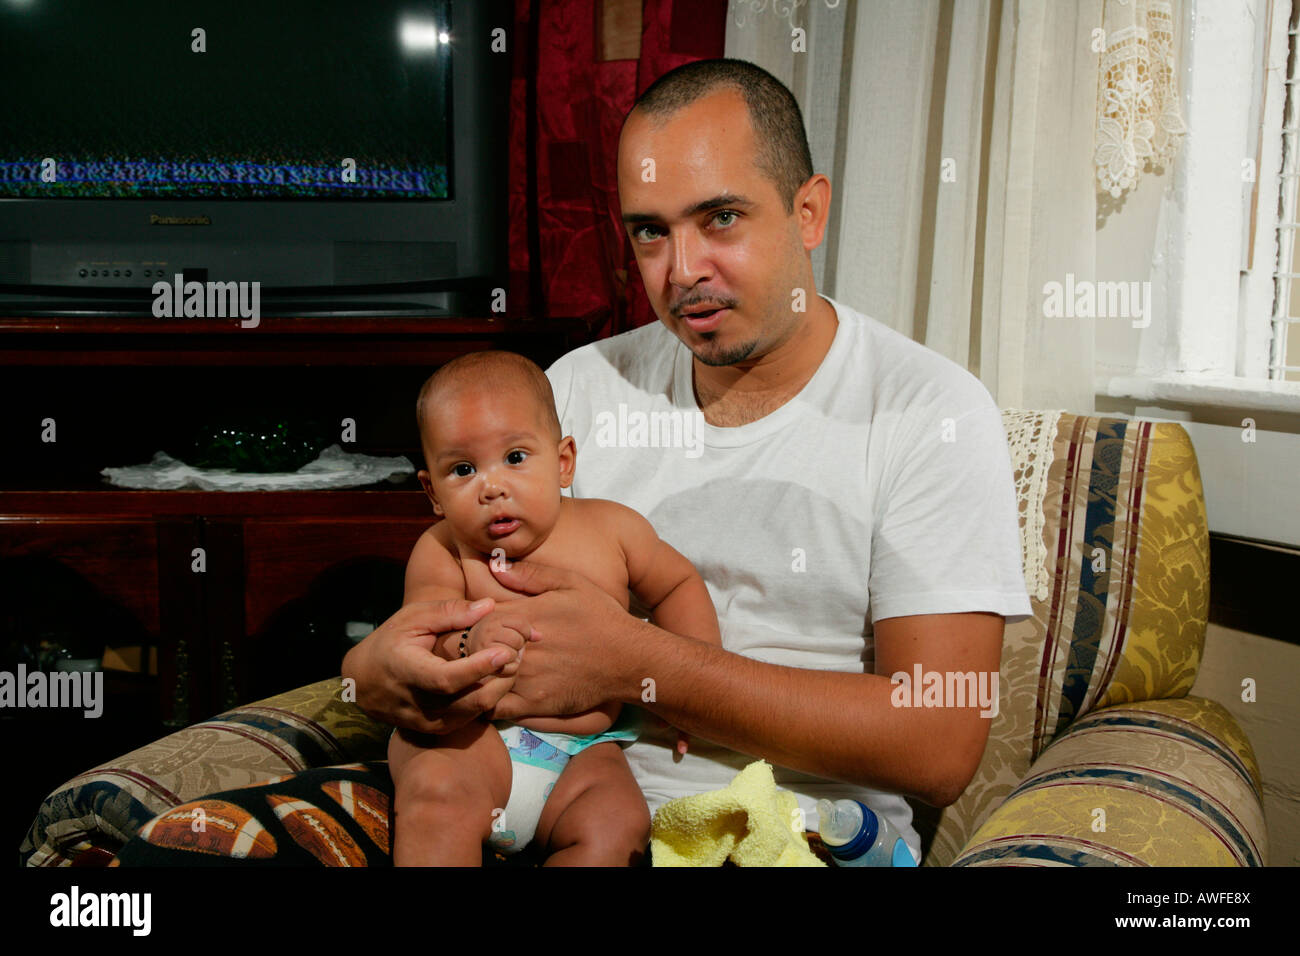 Father holding infant on his lap, Georgetown, Guyana, South America Stock Photo